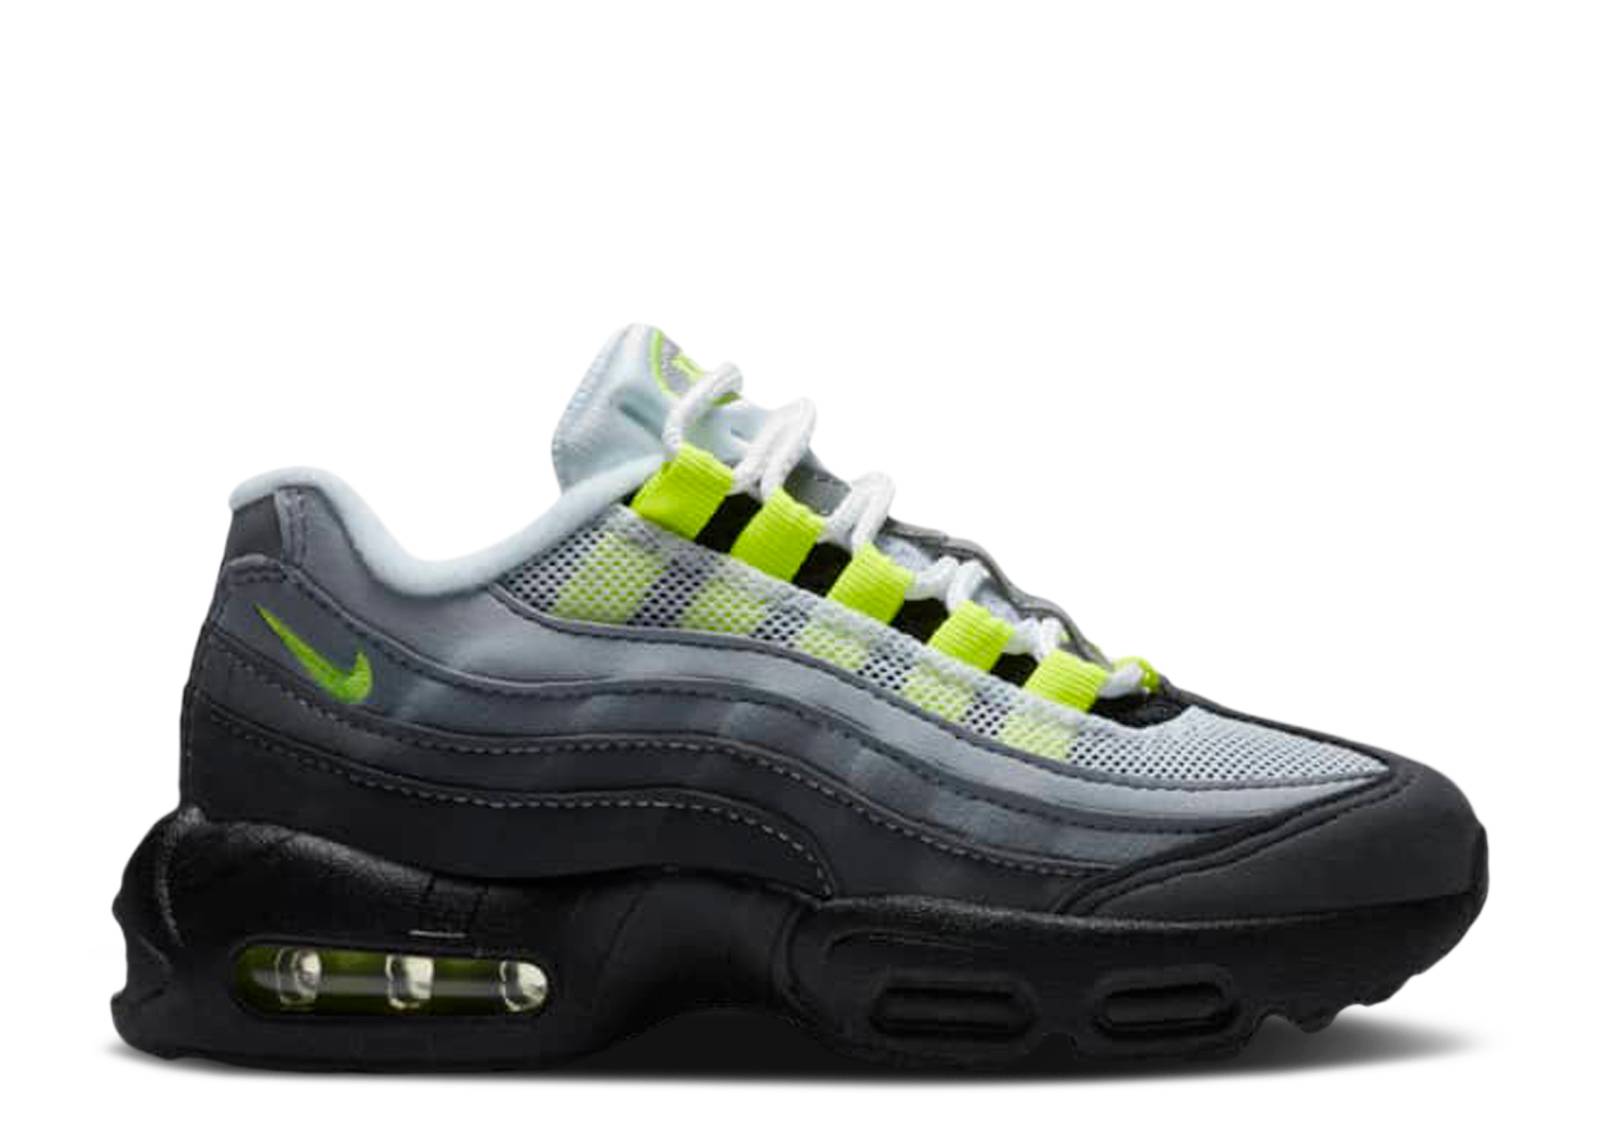 Air Max 95 OG PS 'Neon' 2020